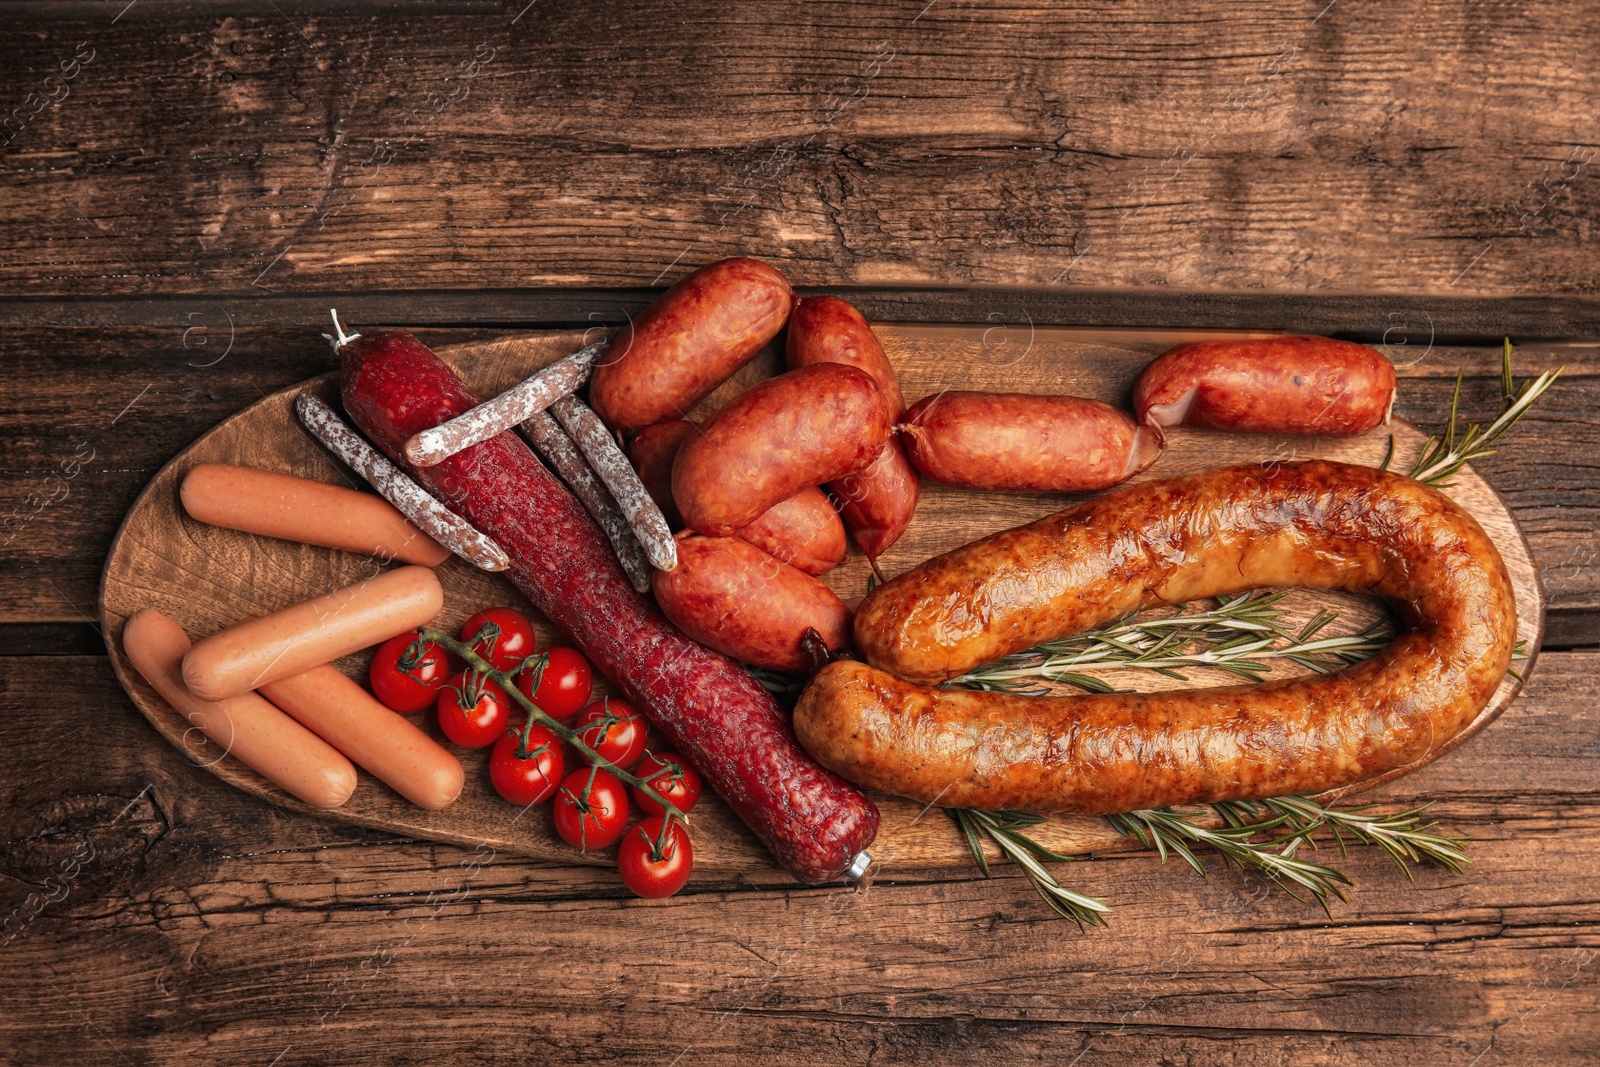 Photo of Different tasty sausages on wooden table, top view